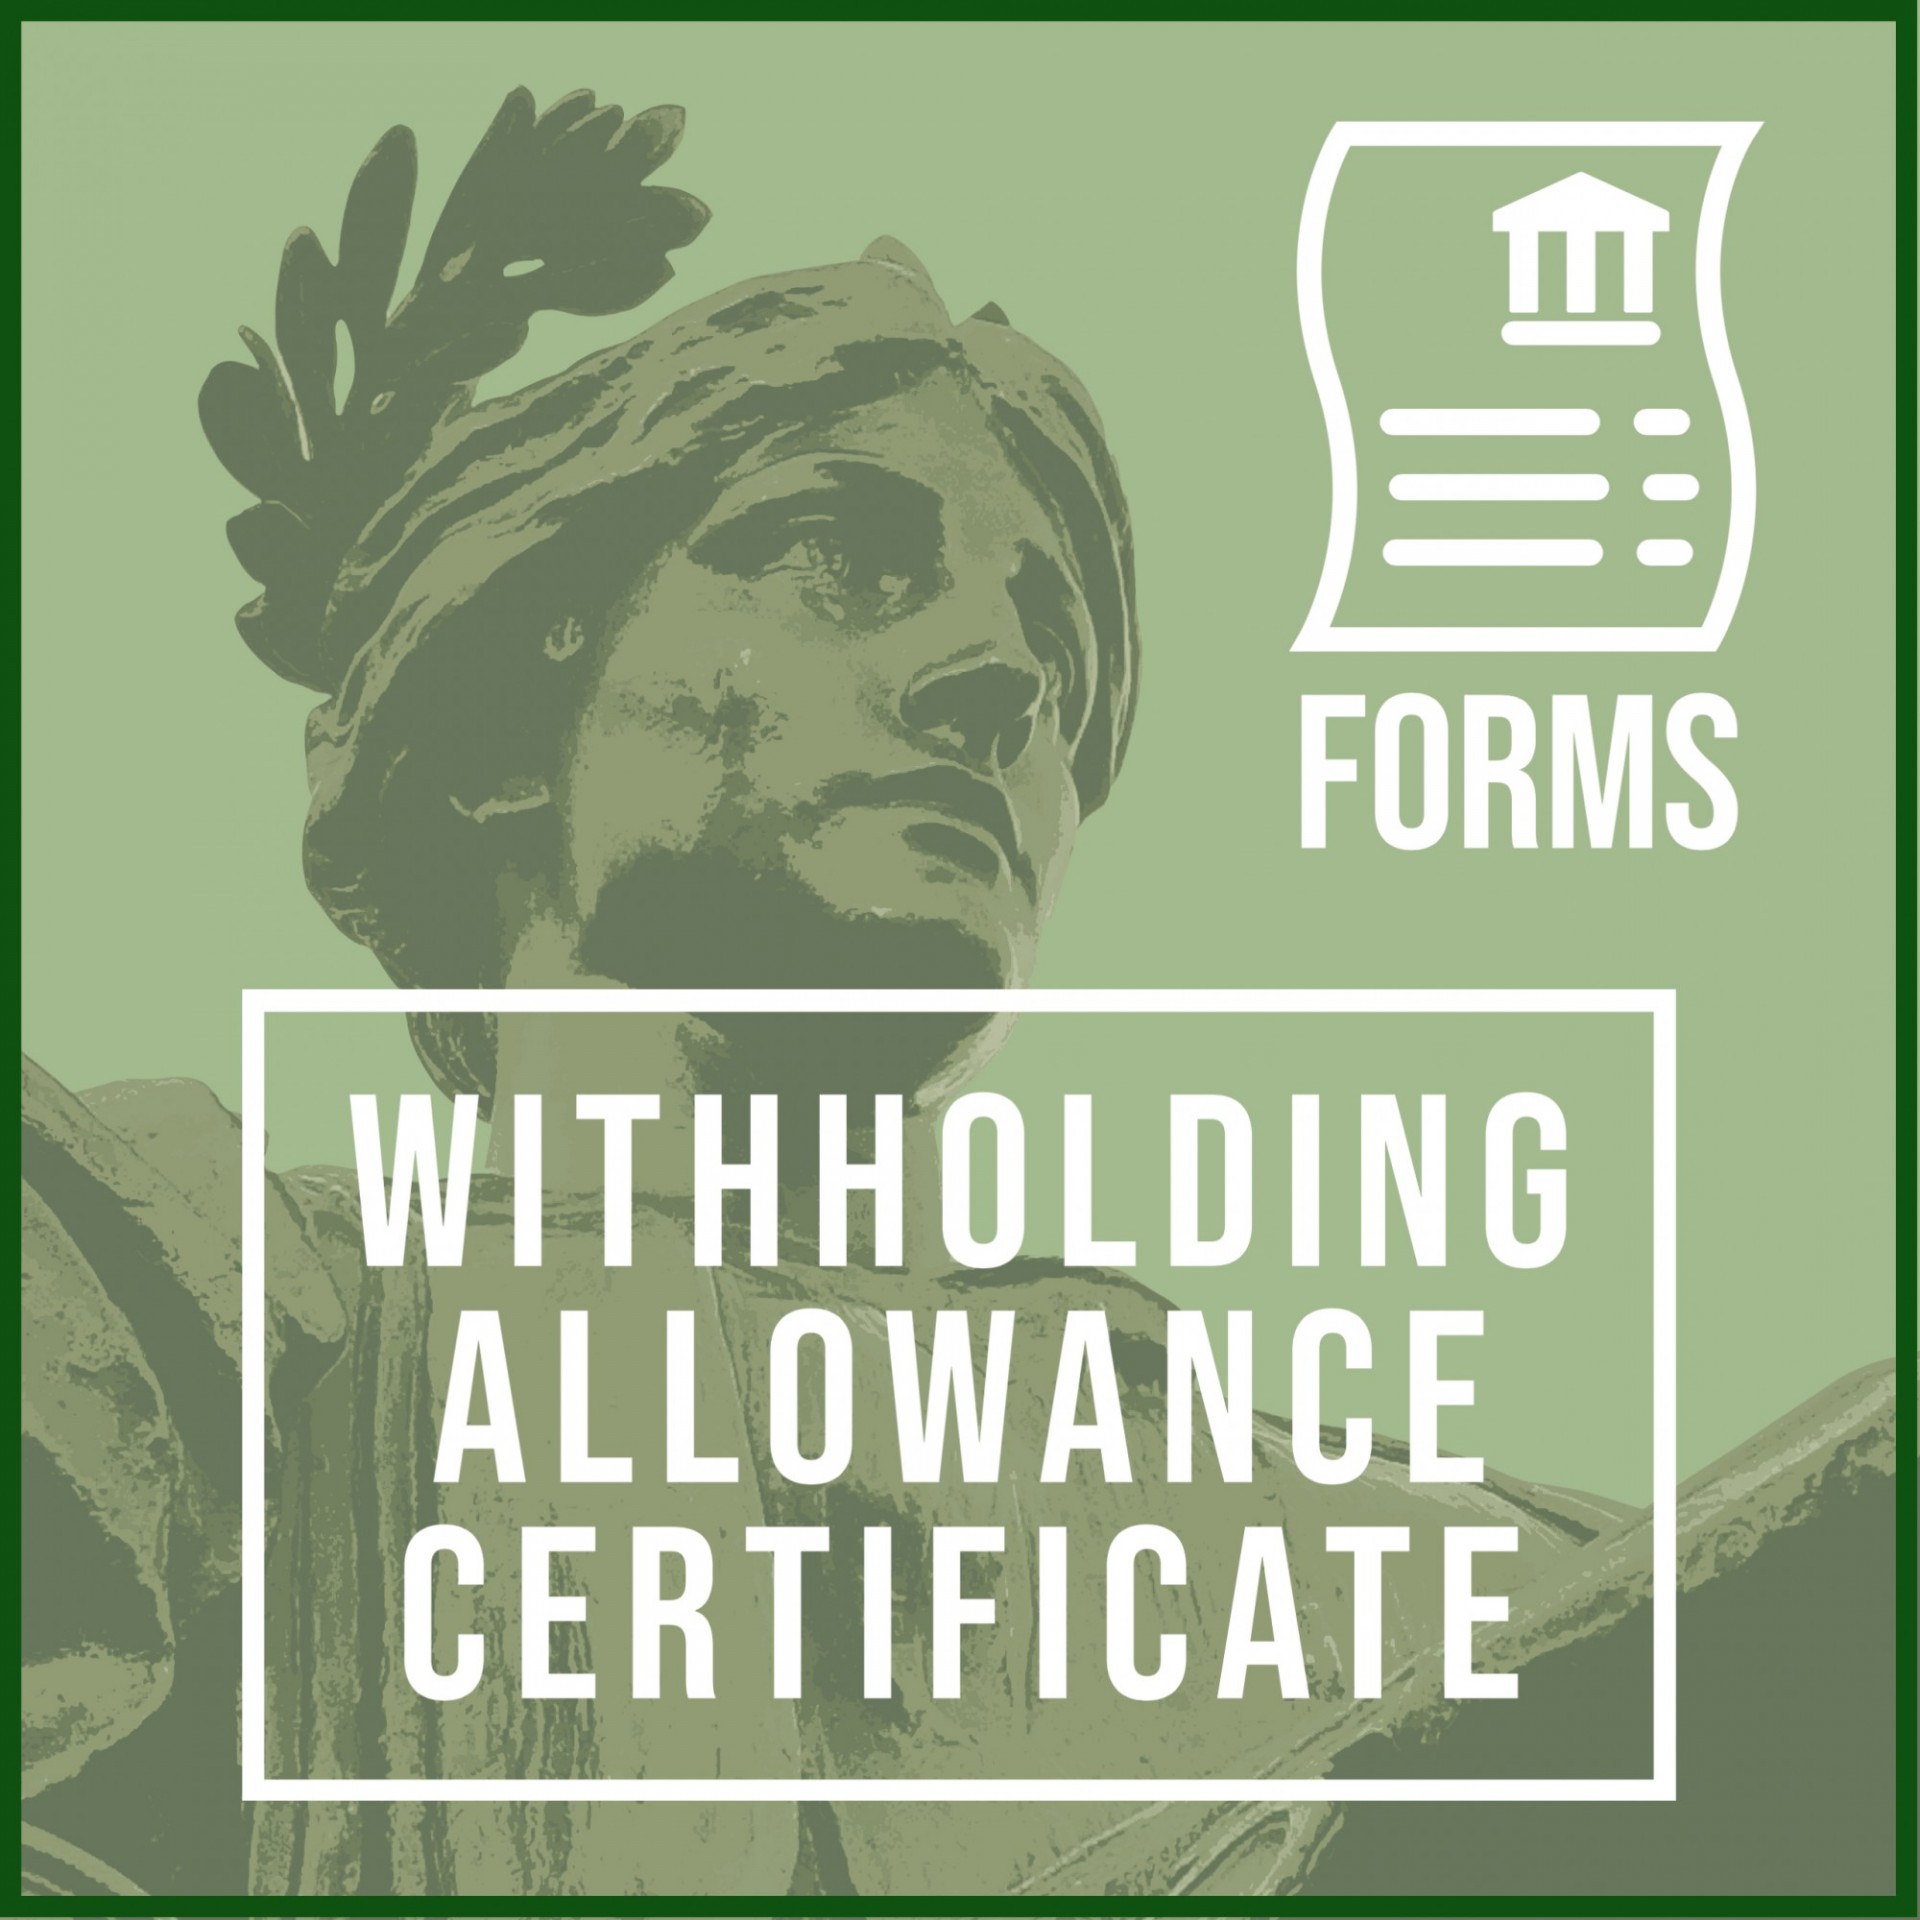 Forms Icon: Withholding Allowance Certificate